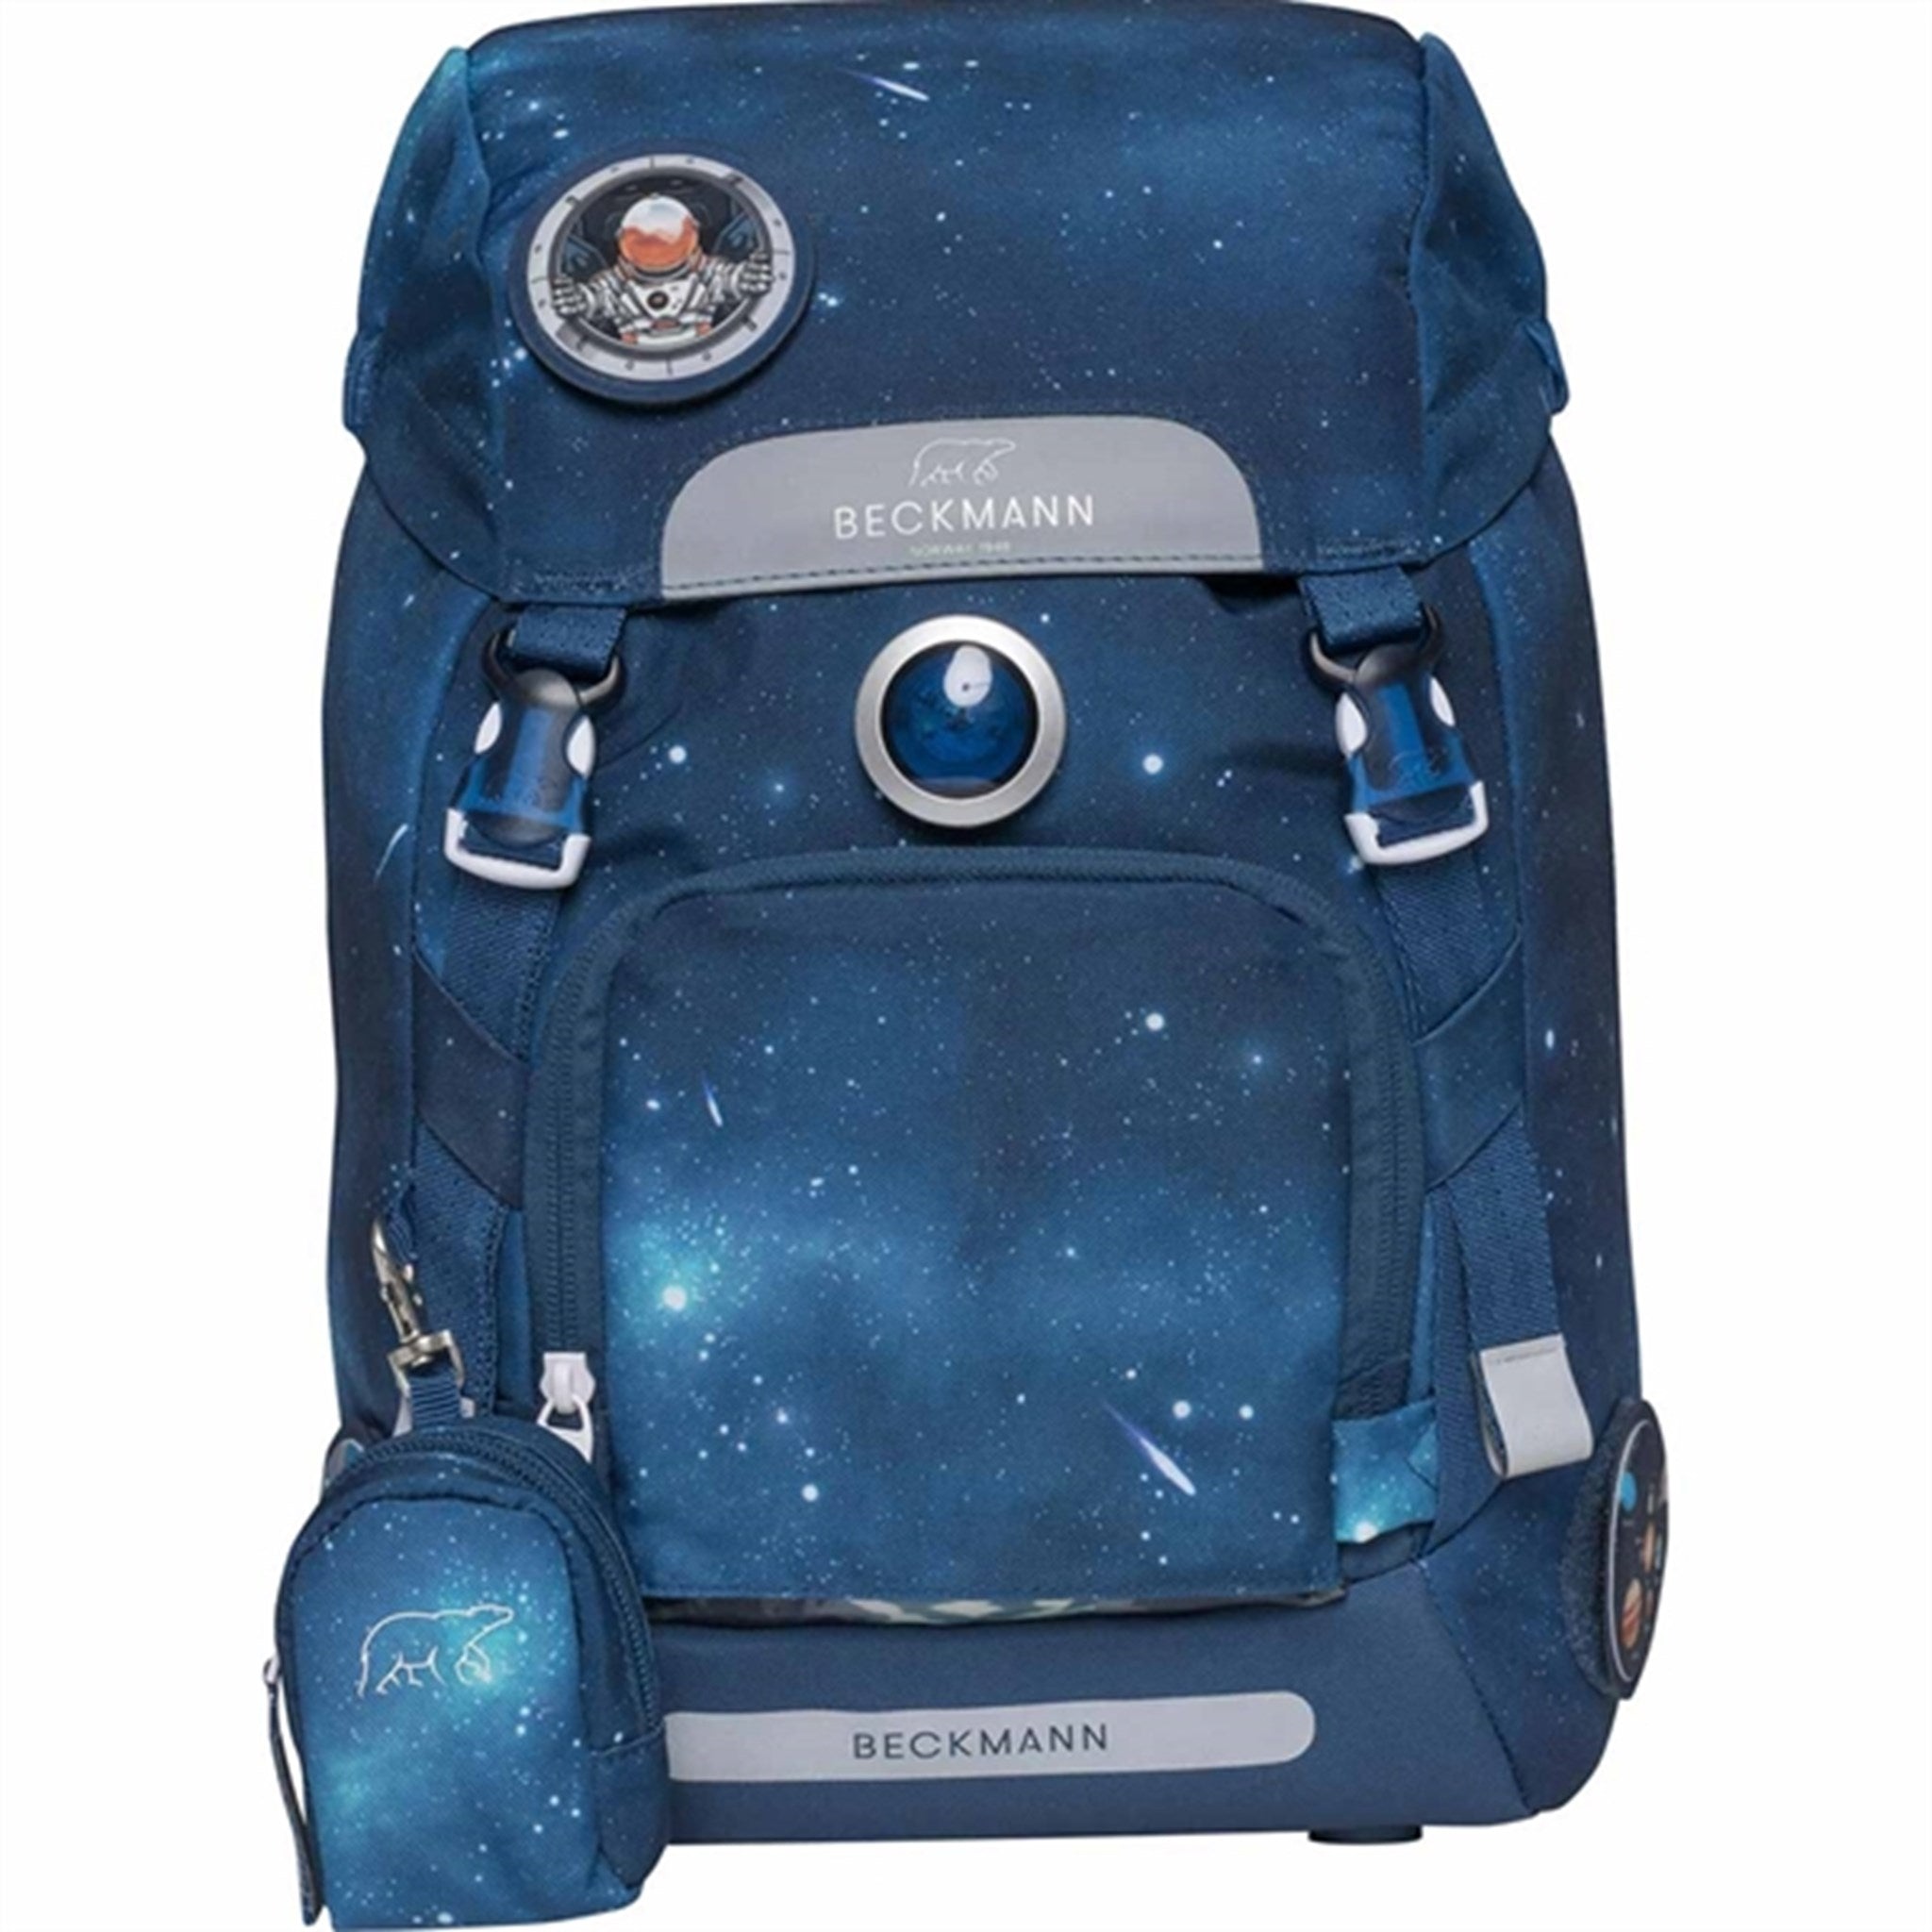 Beckmann Classic 22 Space Mission 6